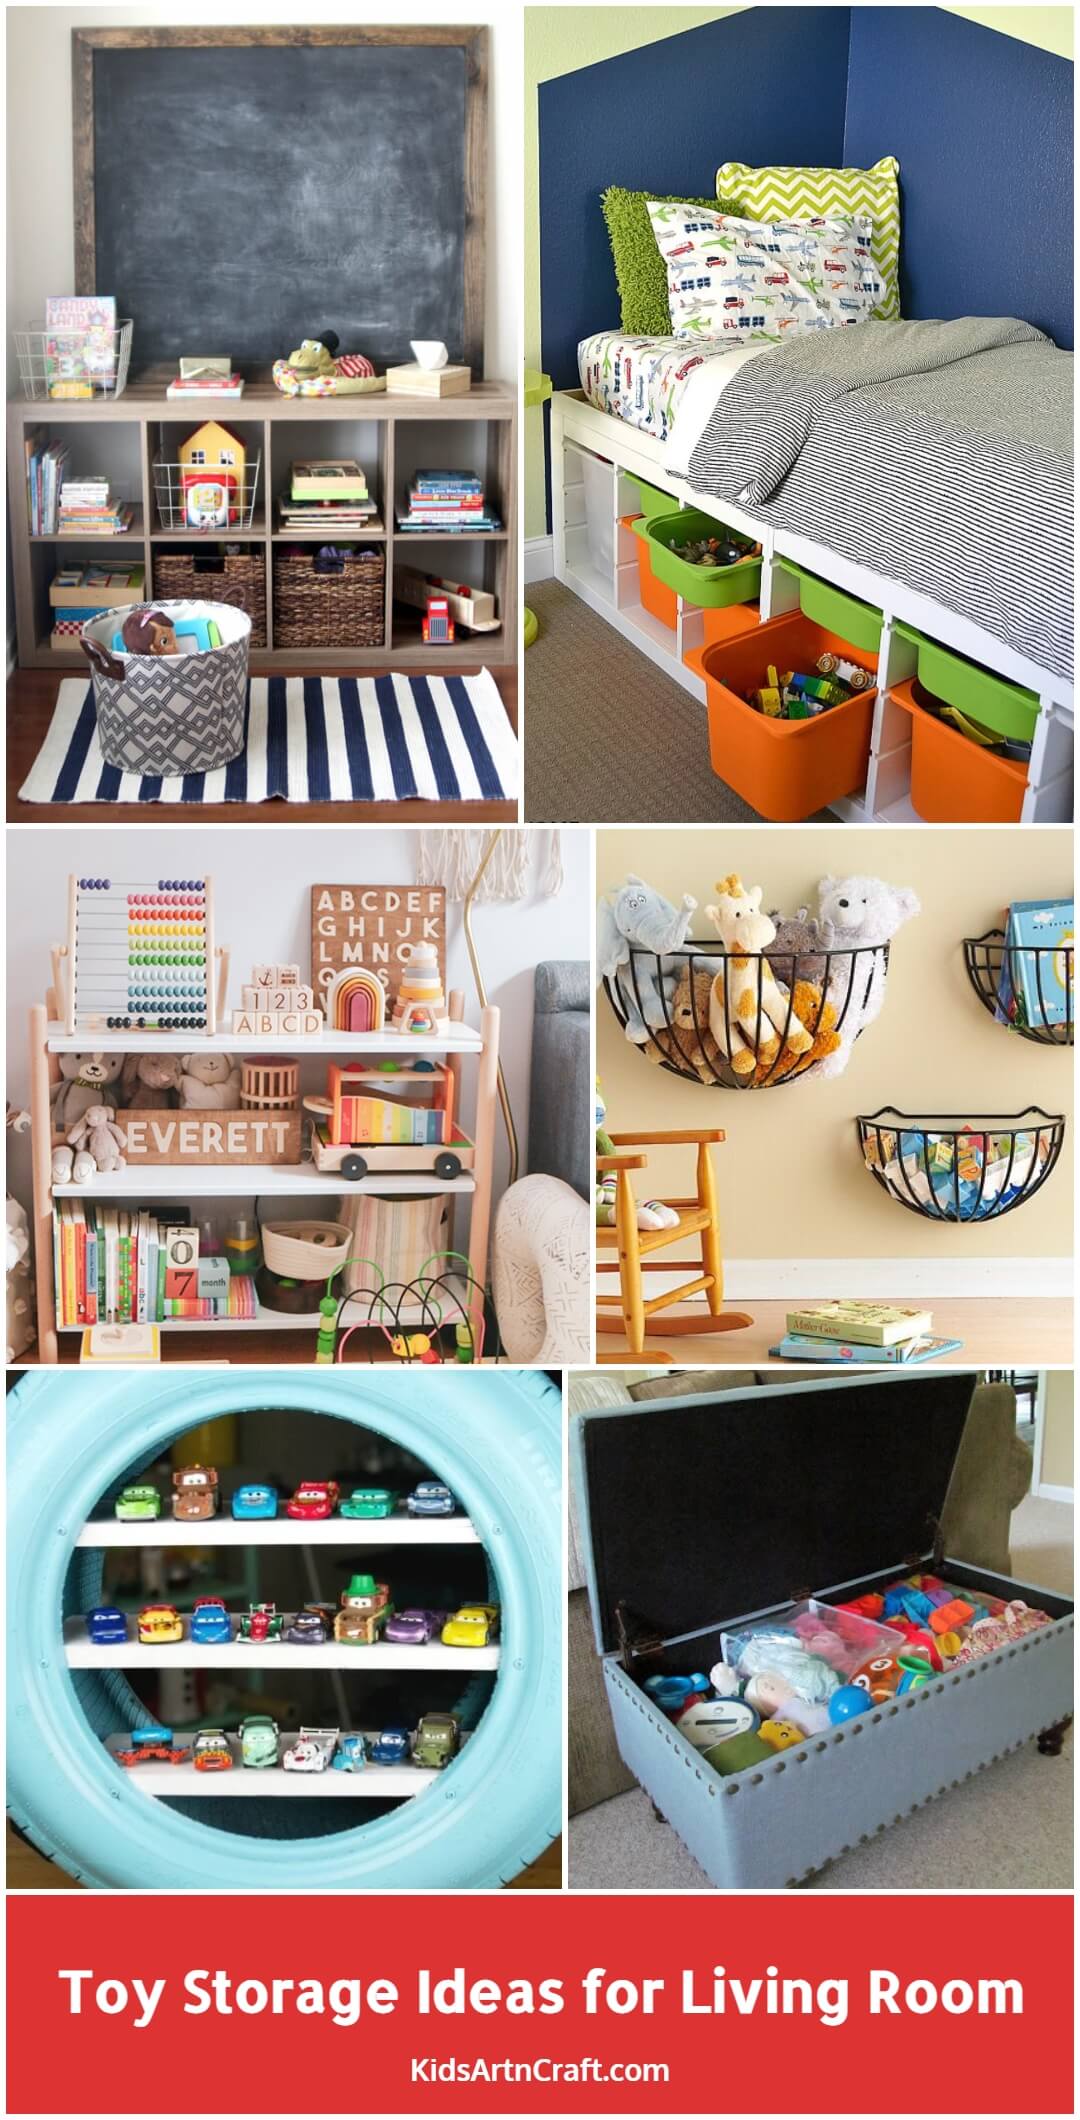 Toy Storage Ideas for Living Room